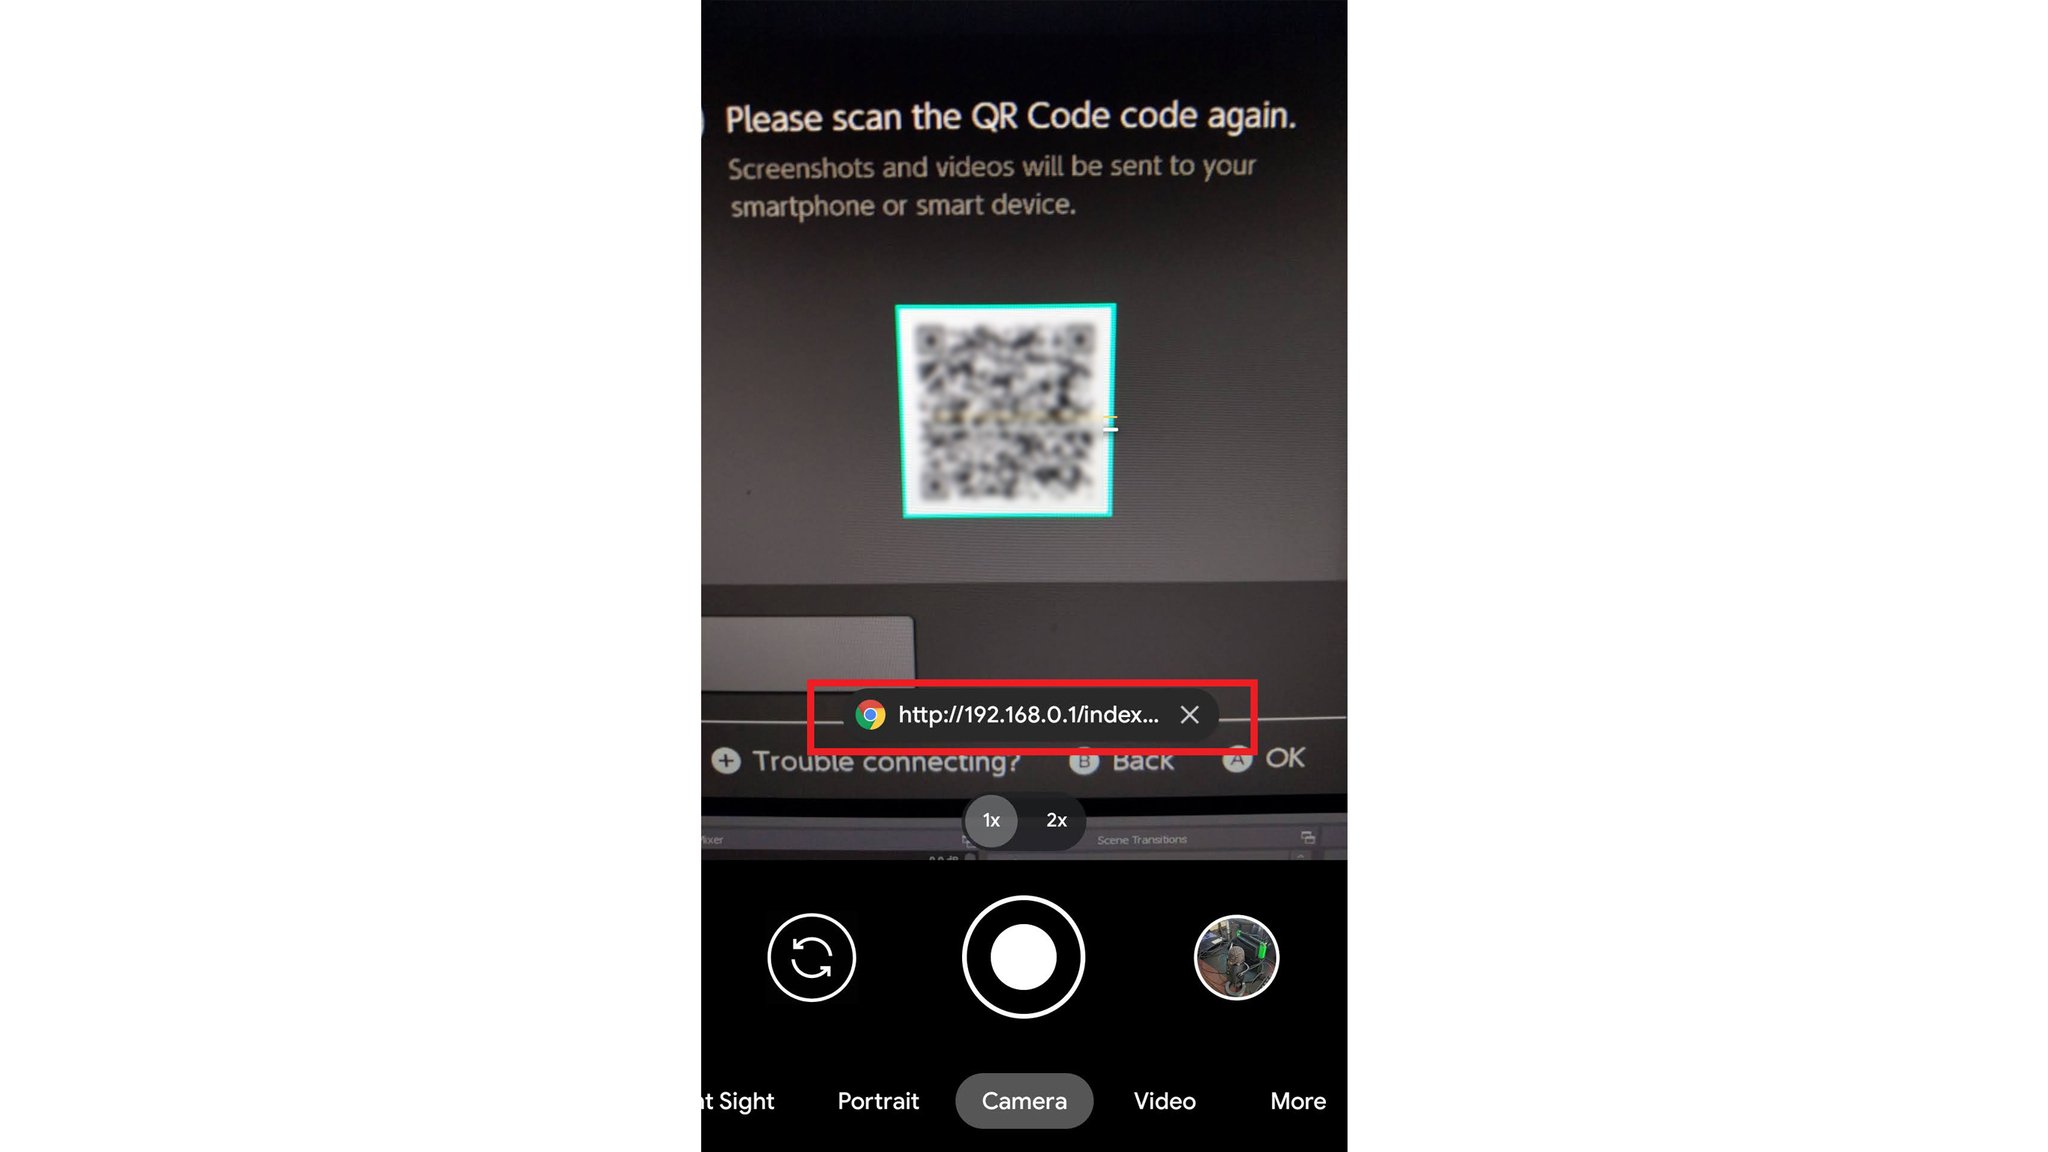 Send Images To Smartphone Scan Second Qr Code